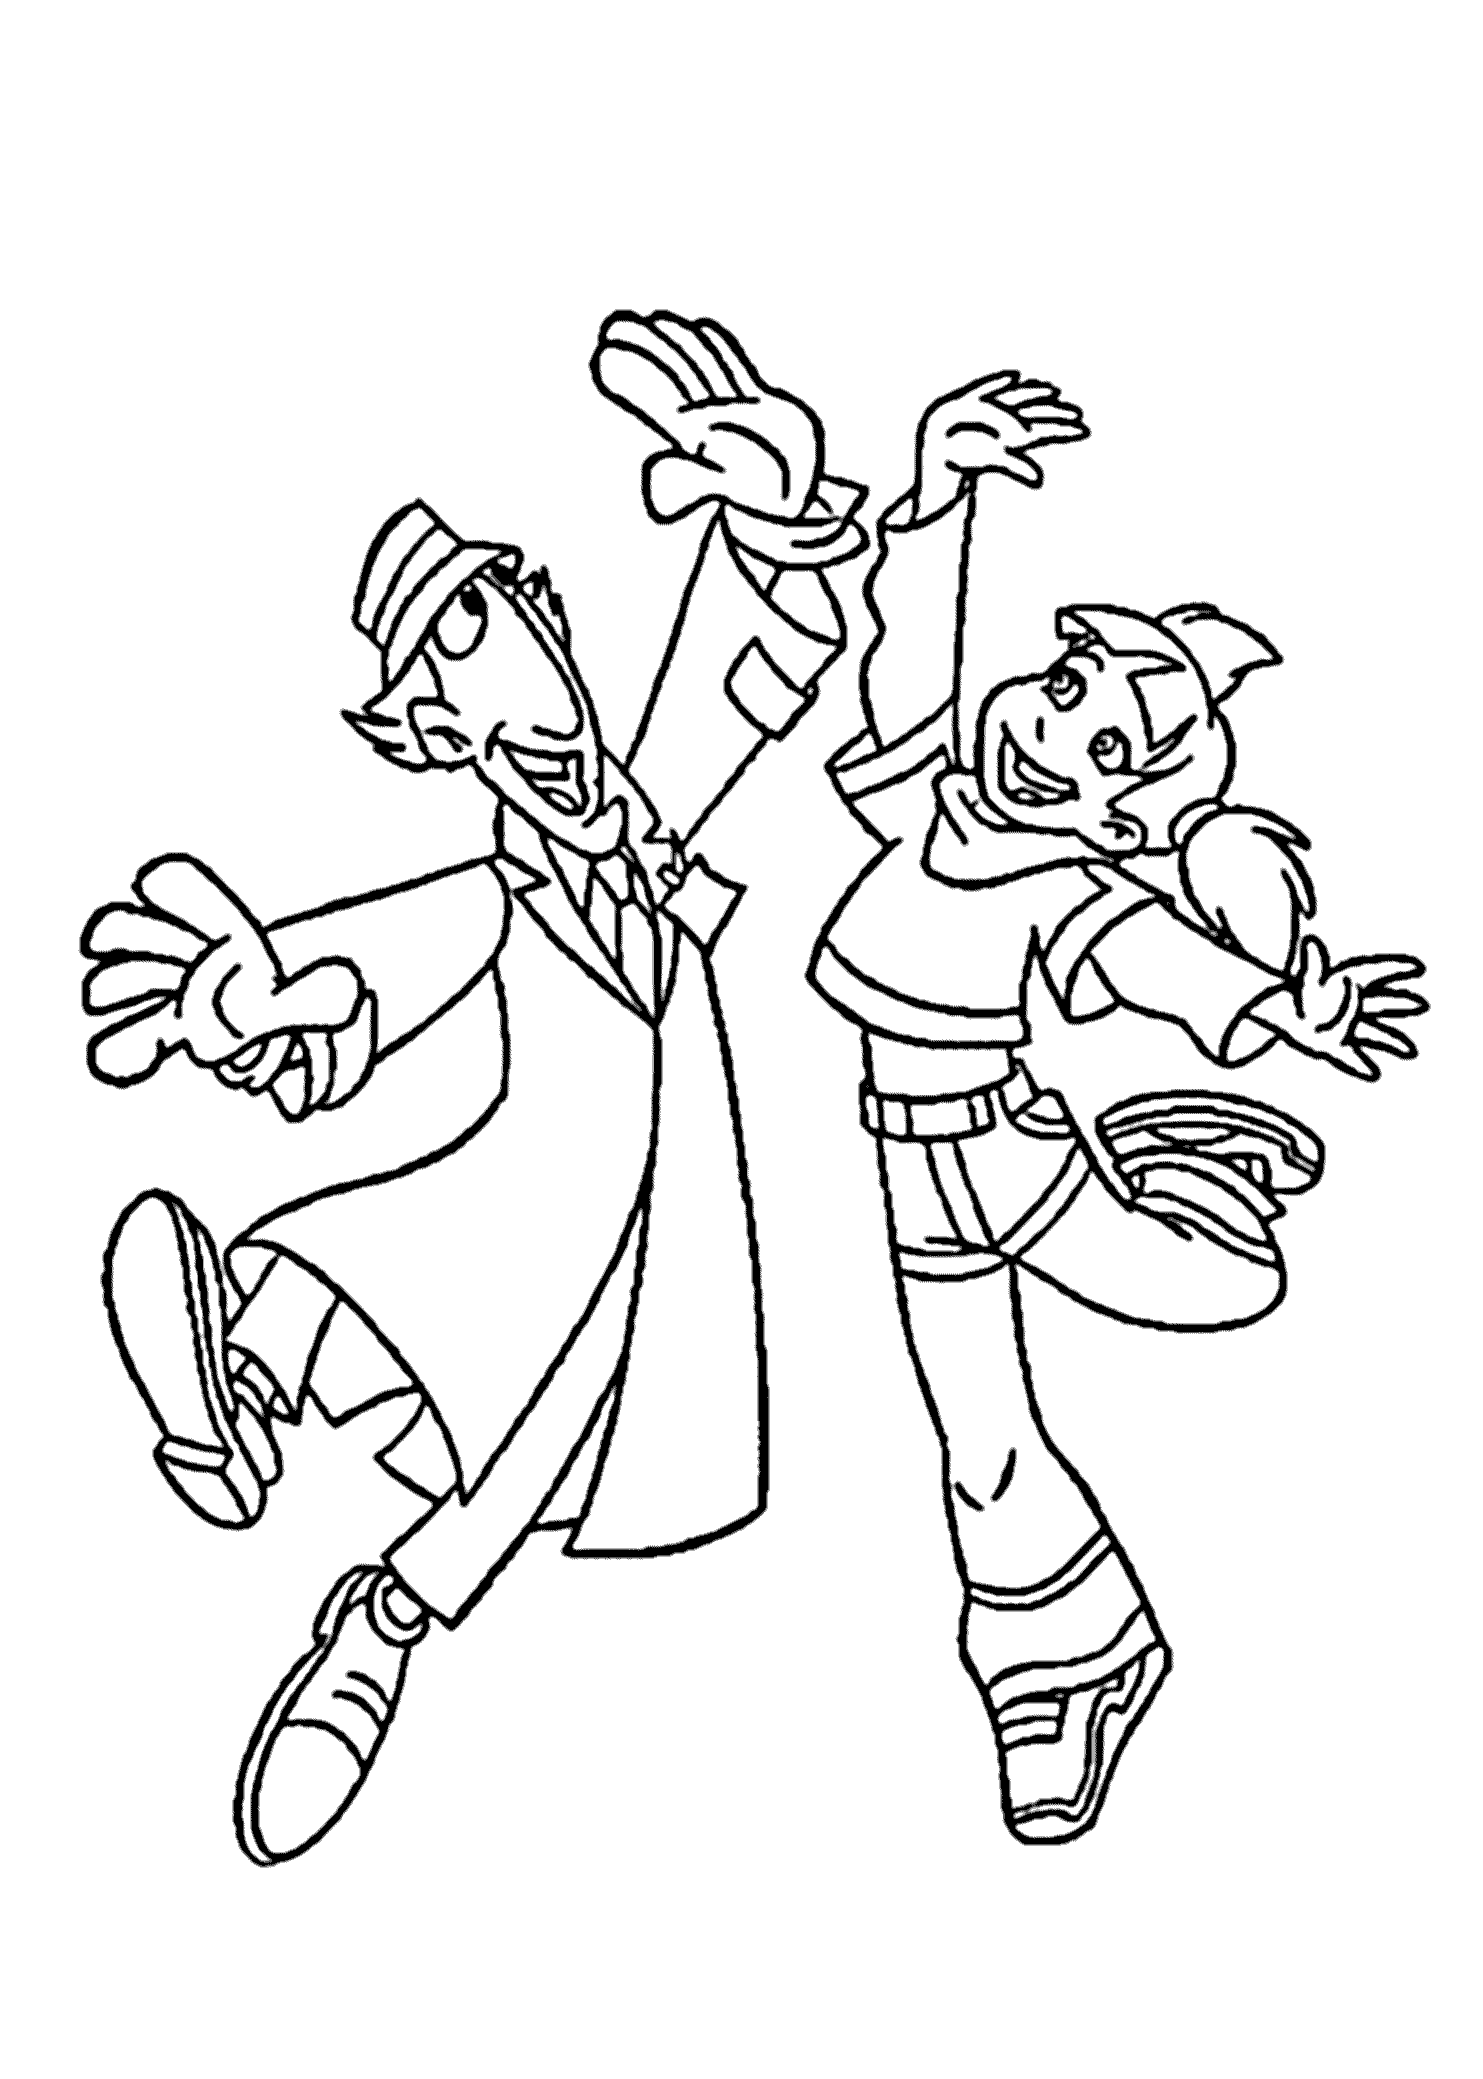 Inspector Gadget And Penny High Five Coloring Page